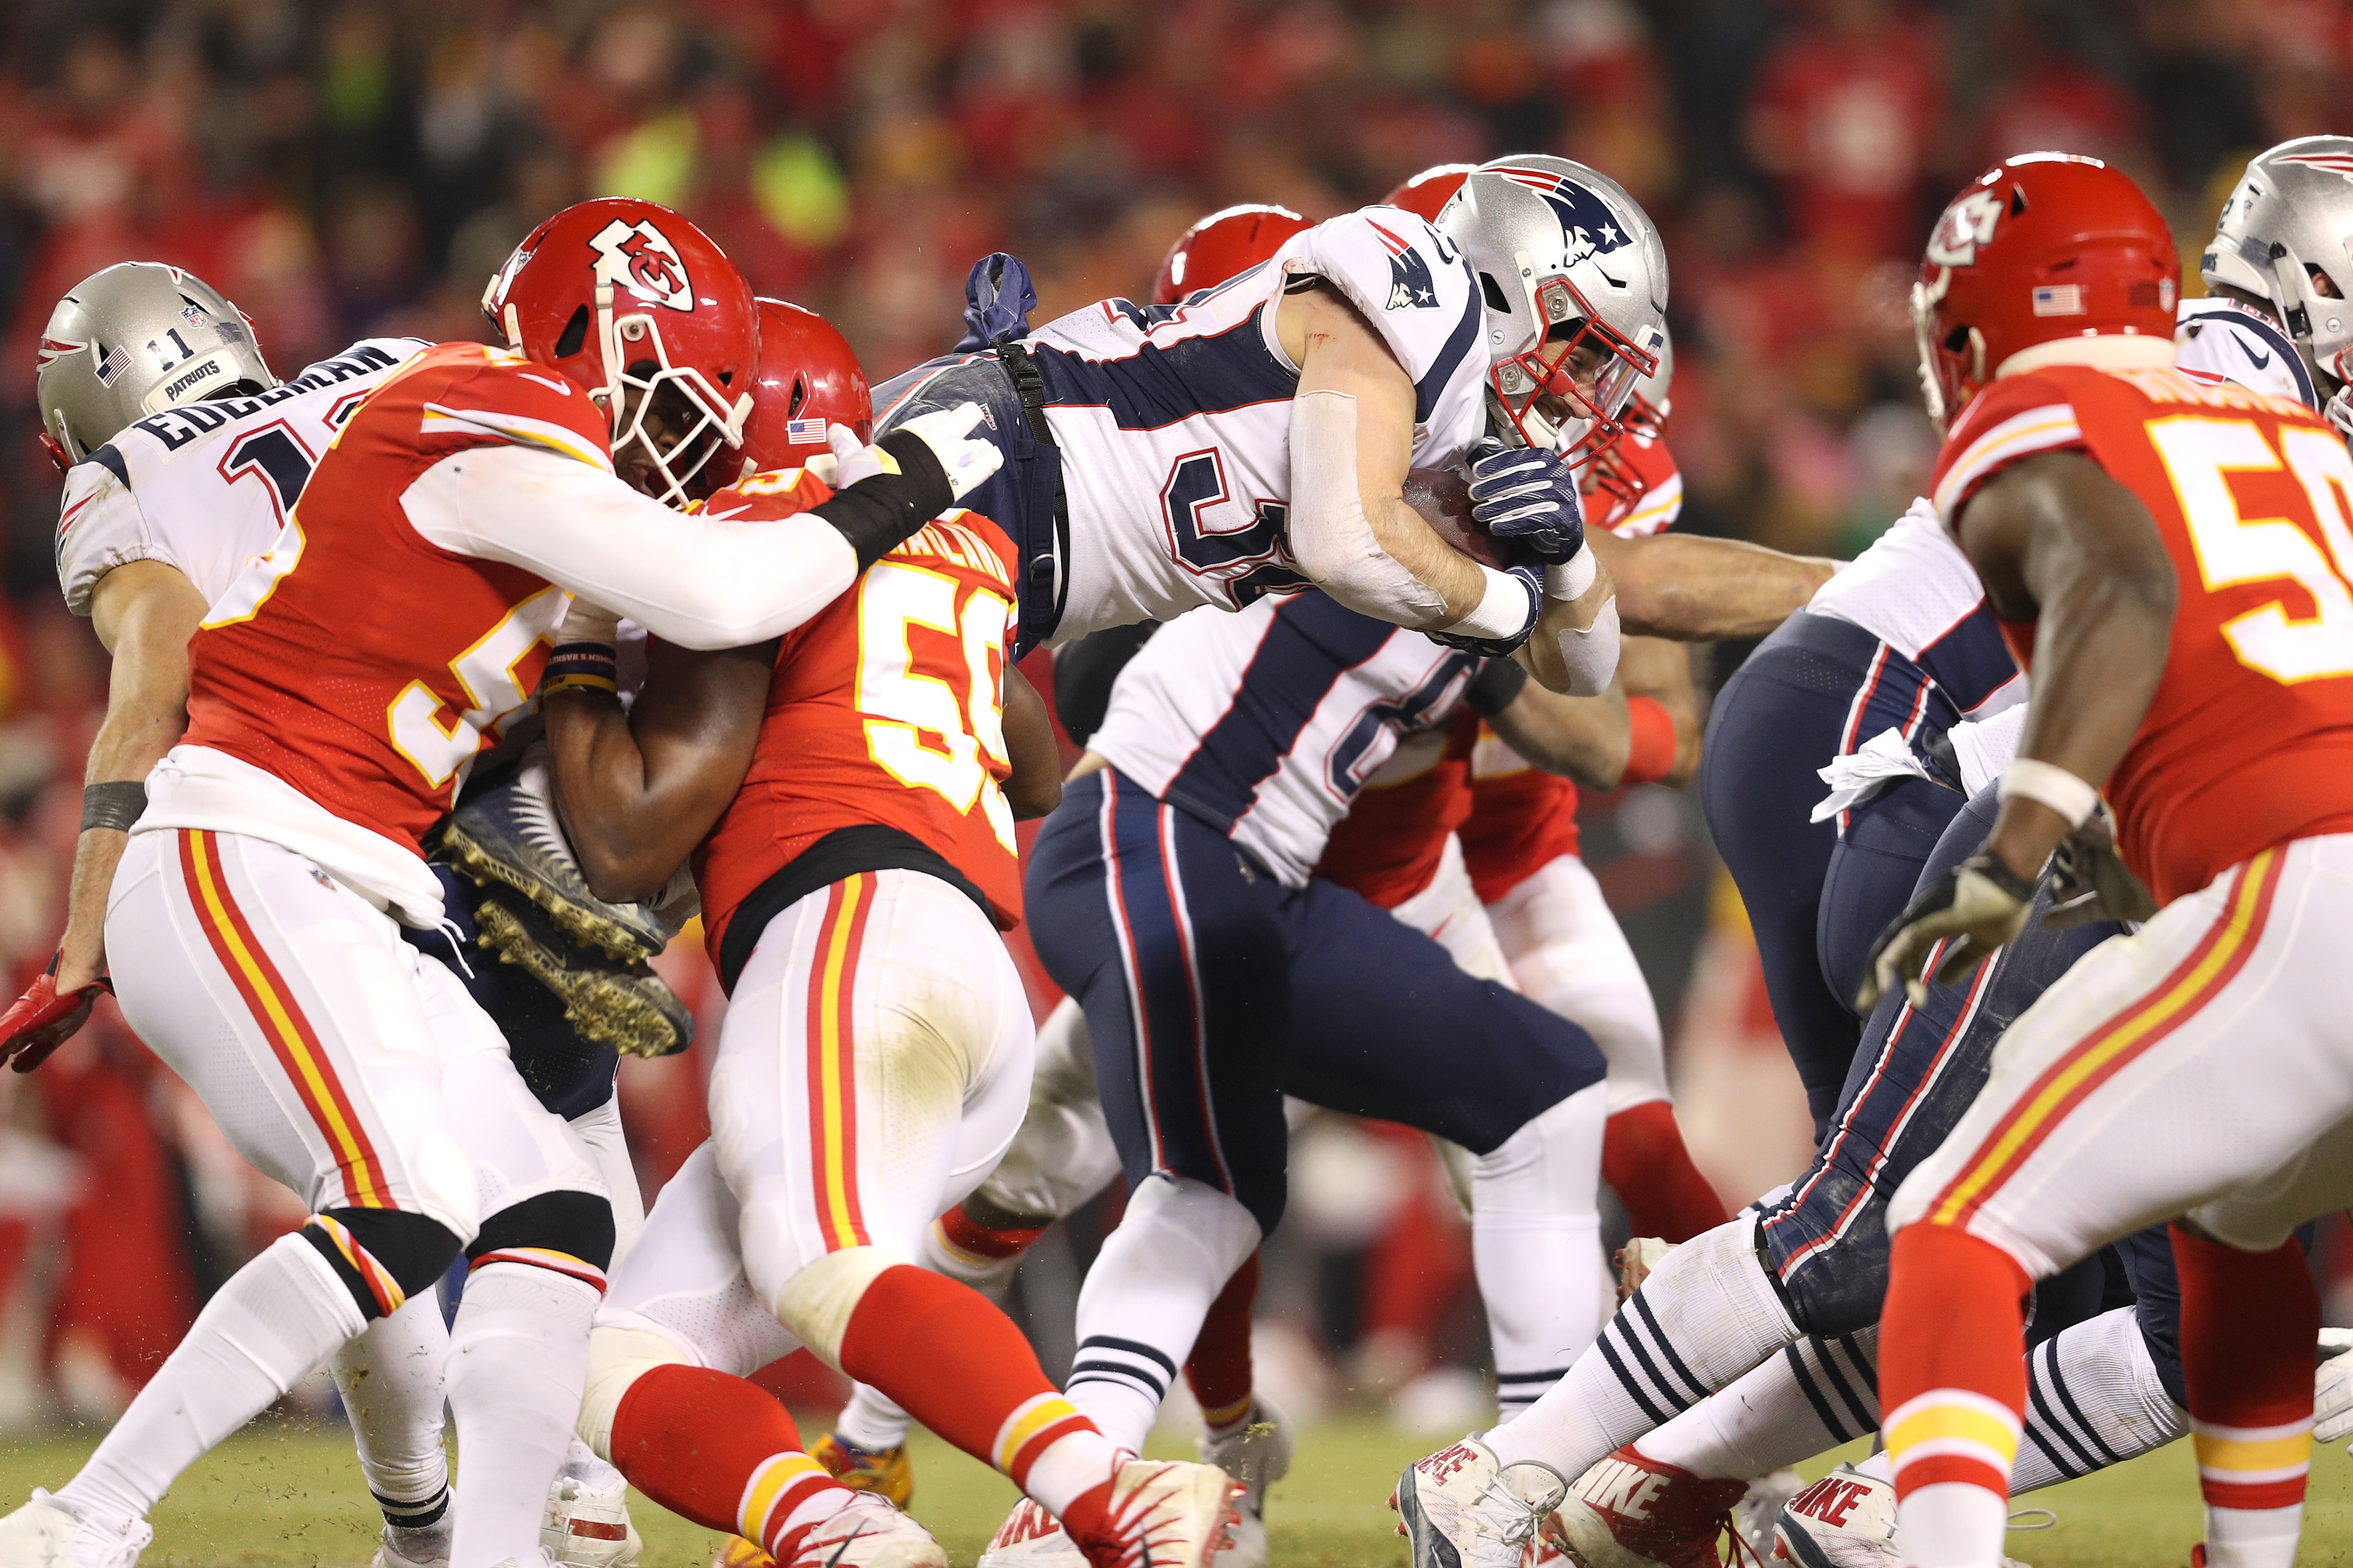 Rex Burkhead #34 of the New England Patriots is tackled as he carries the ball in the second half against the Kansas City Chiefs during the AFC Championship Game at Arrowhead Stadium on January 20, 2019 in Kansas City, Missouri. (Photo by Patrick Smith/Getty Images) (Patrick Smith—Getty Images)